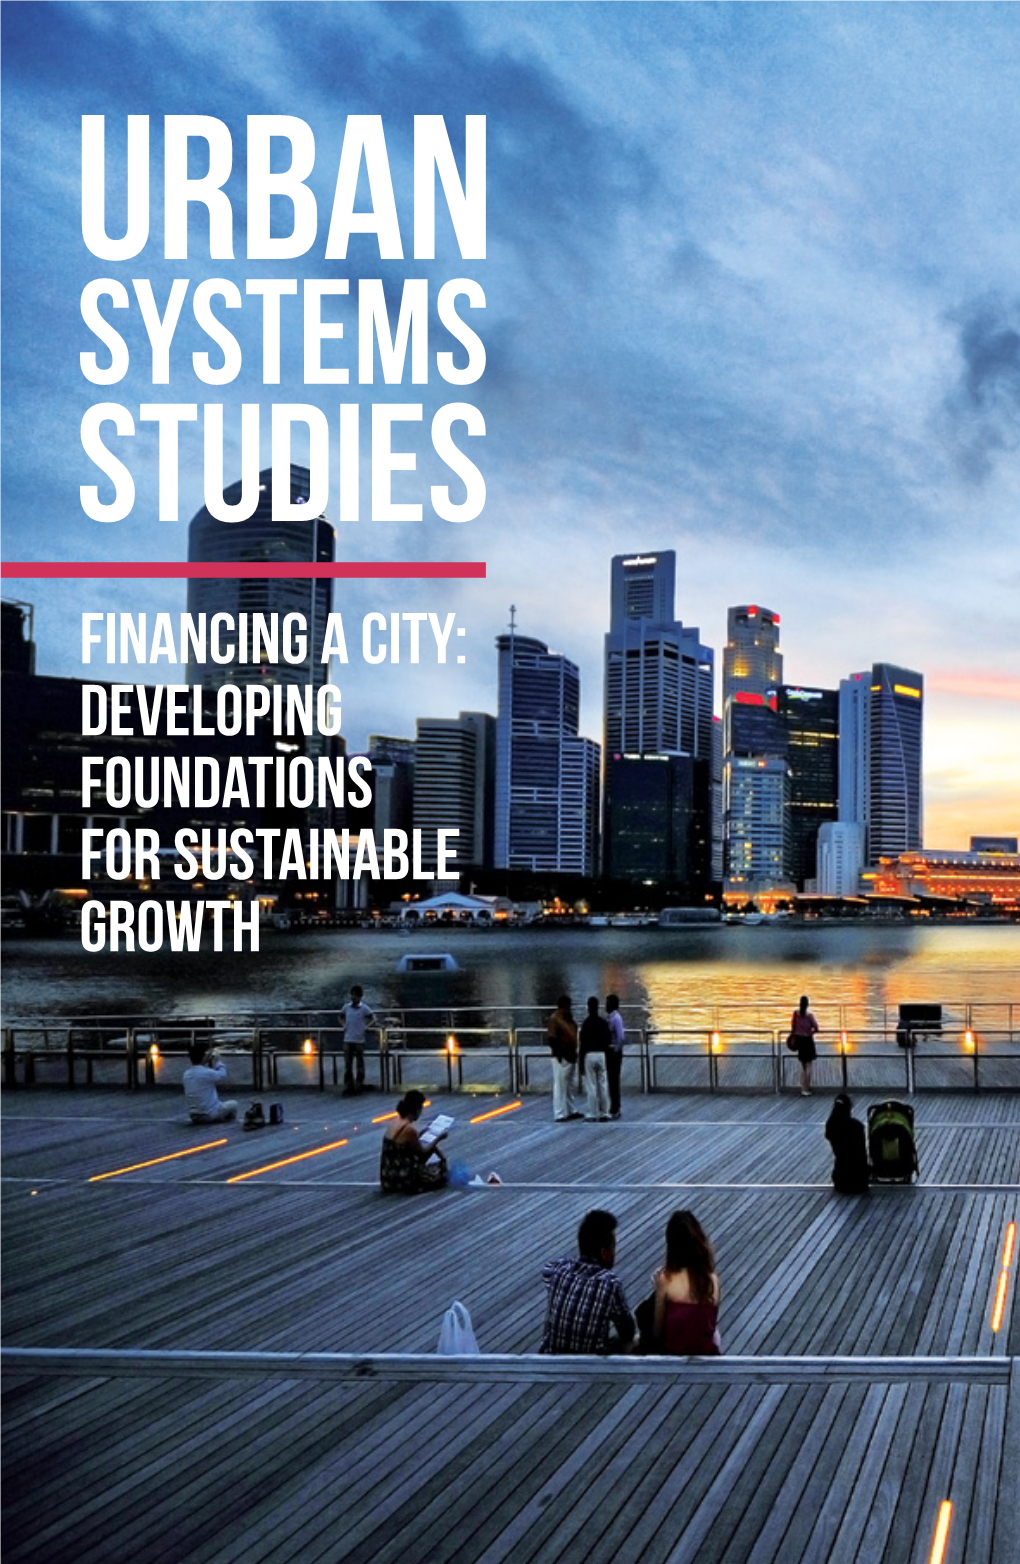 Financing a City: Developing Foundations for Sustainable Growth